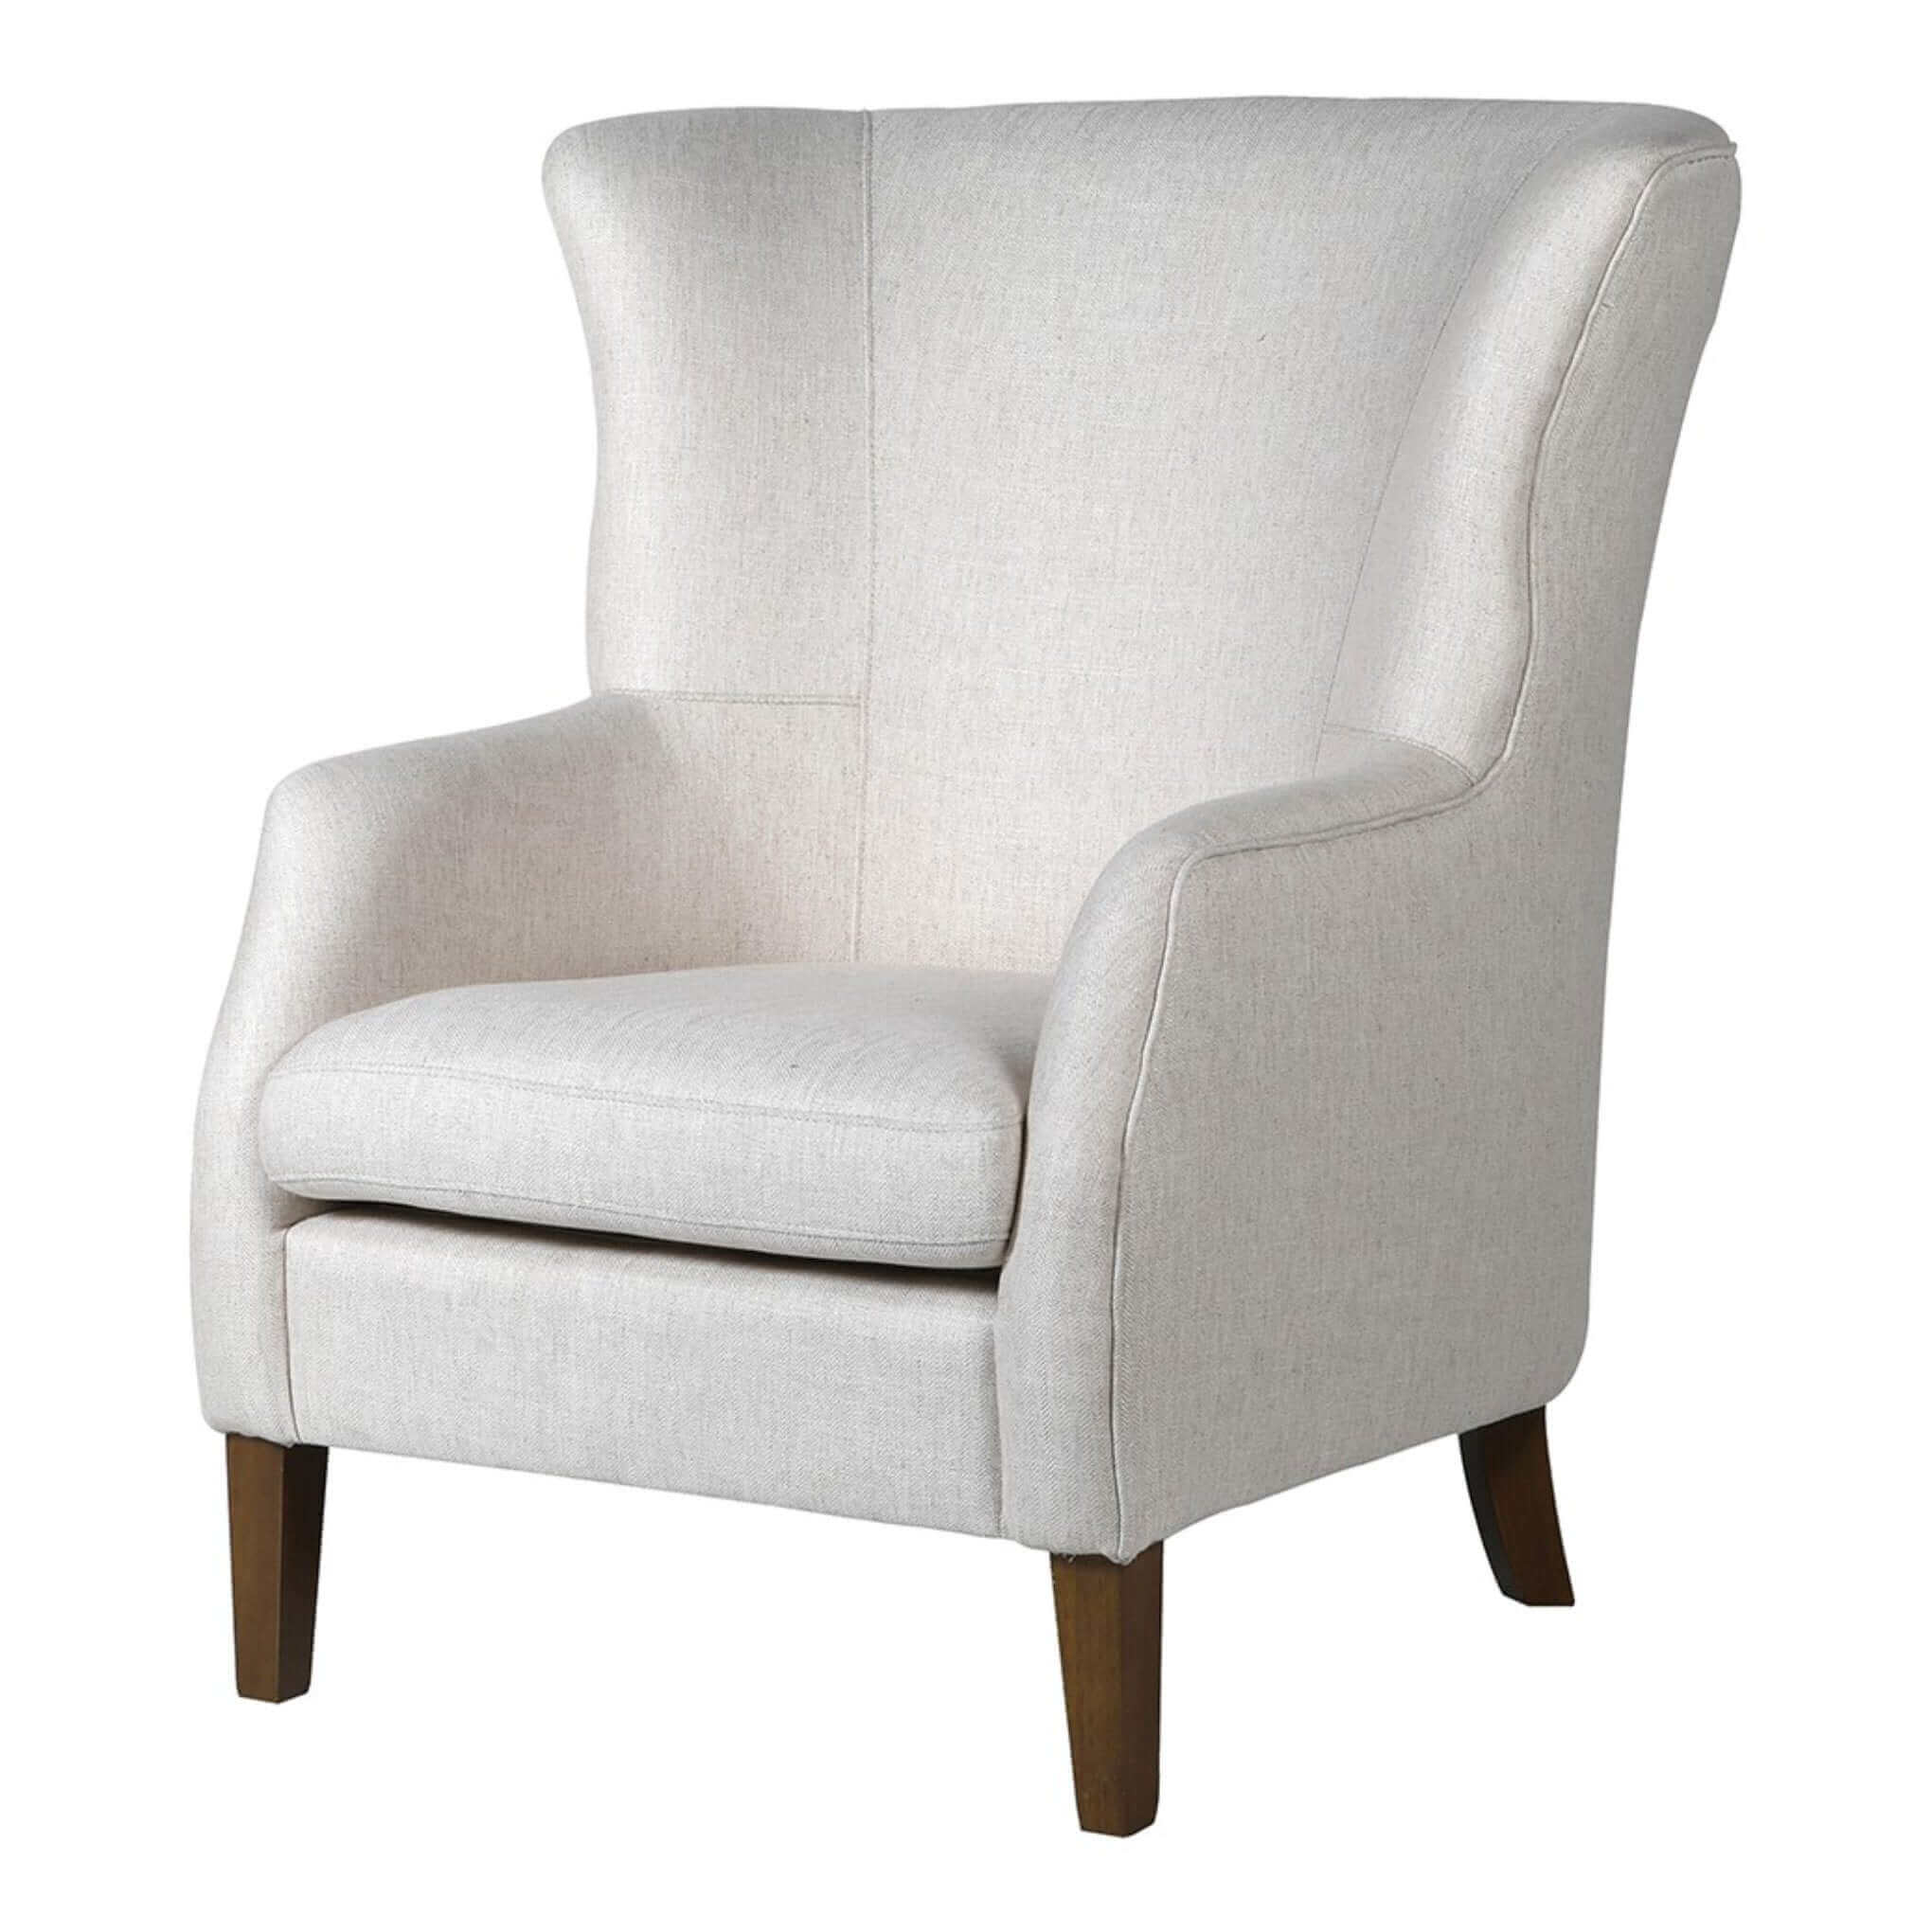 Dart Wingback Chair - escapologyhome.co.uk